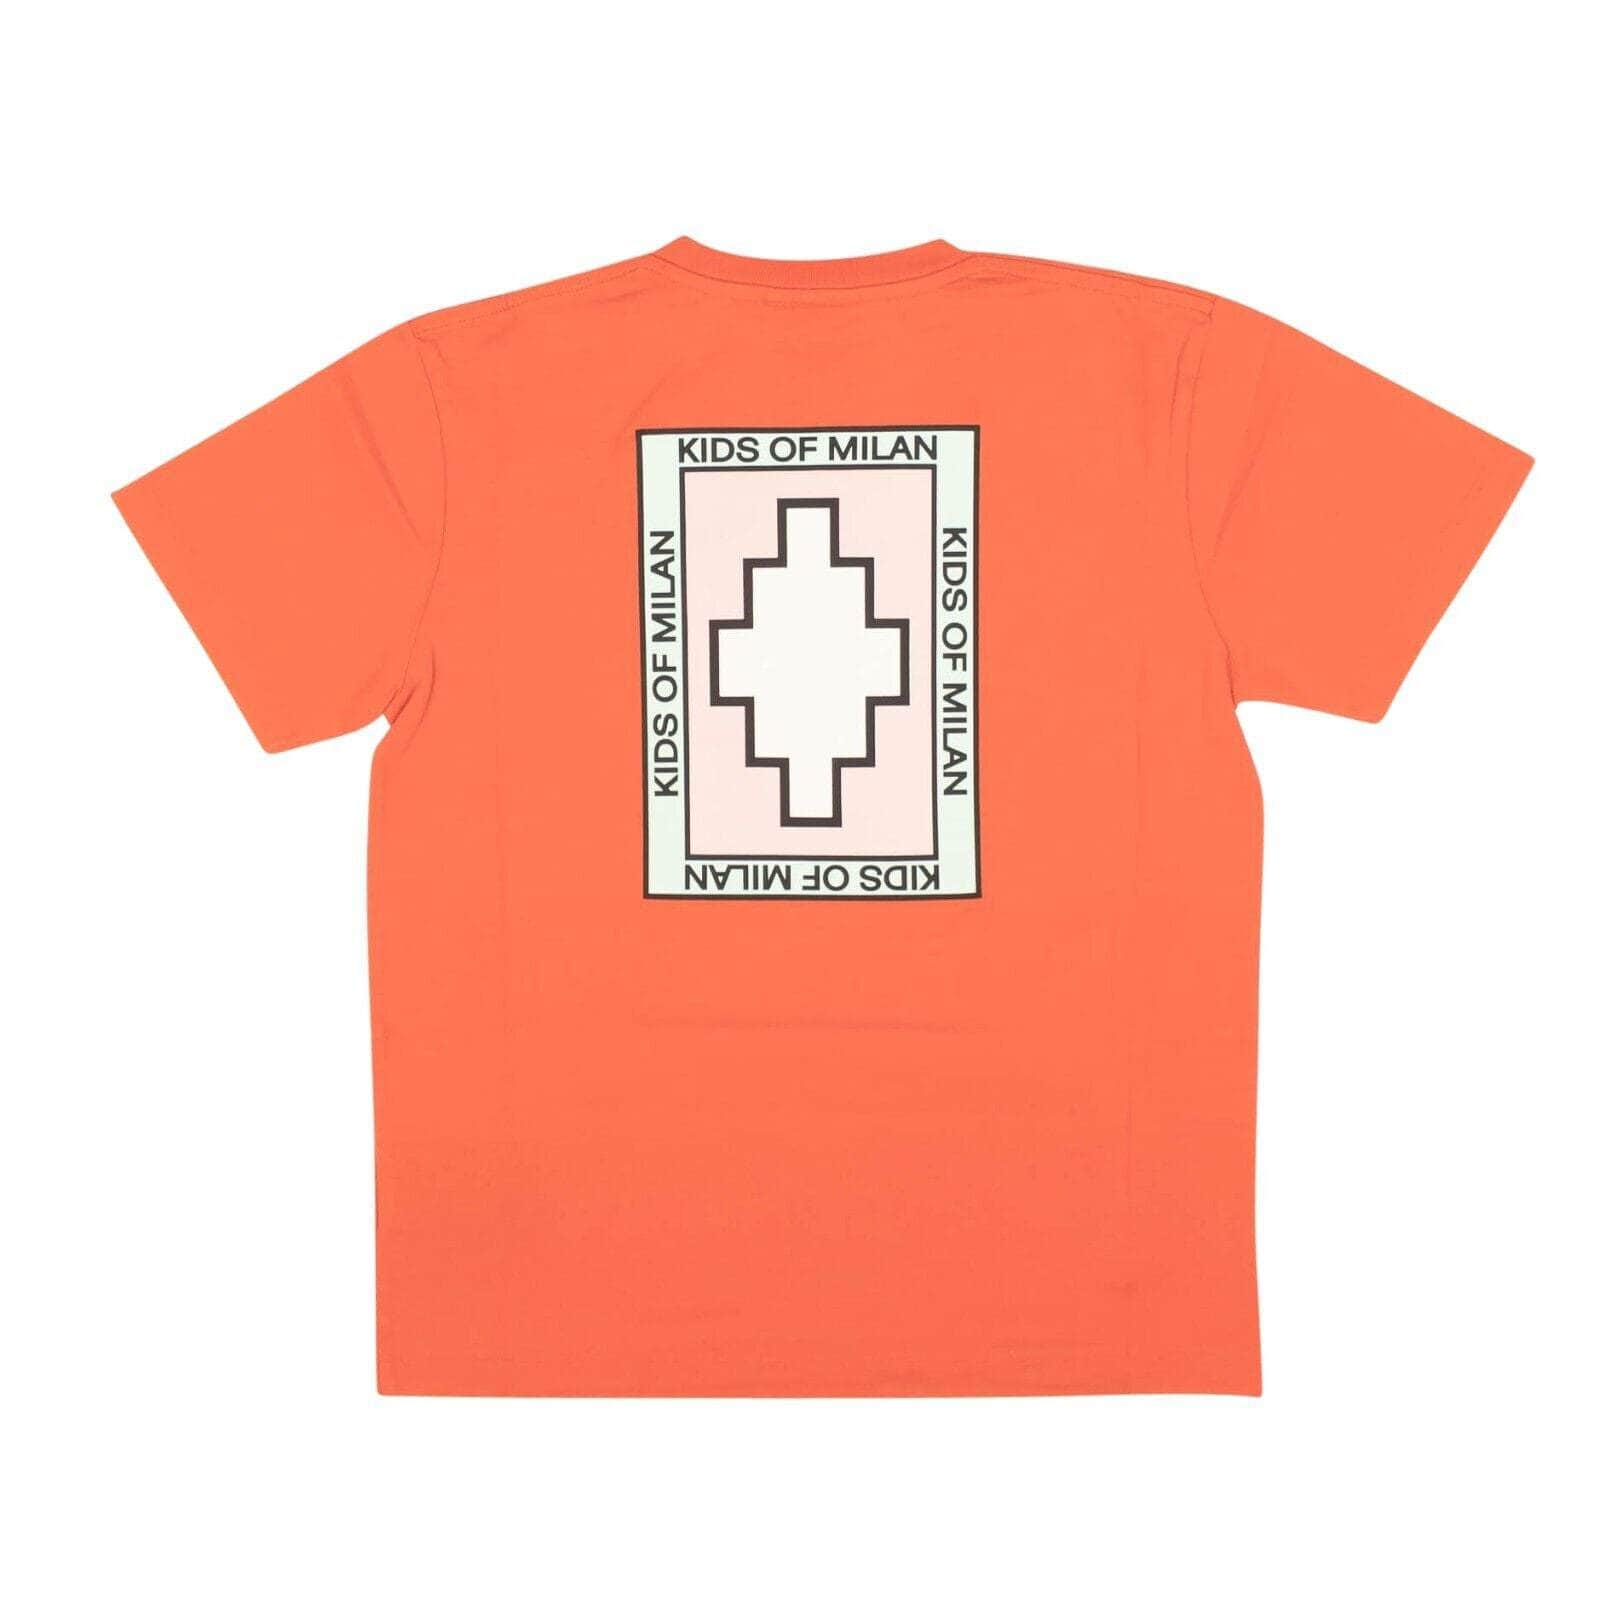 Marcelo Burlon boys-t-shirts, channelenable-all, chicmi, couponcollection, gender-womens, main-clothing, marcelo-burlon, size-10, size-12, size-8, under-250 Children's Orange Multi Patch Logo Short Sleeve T-Shirt